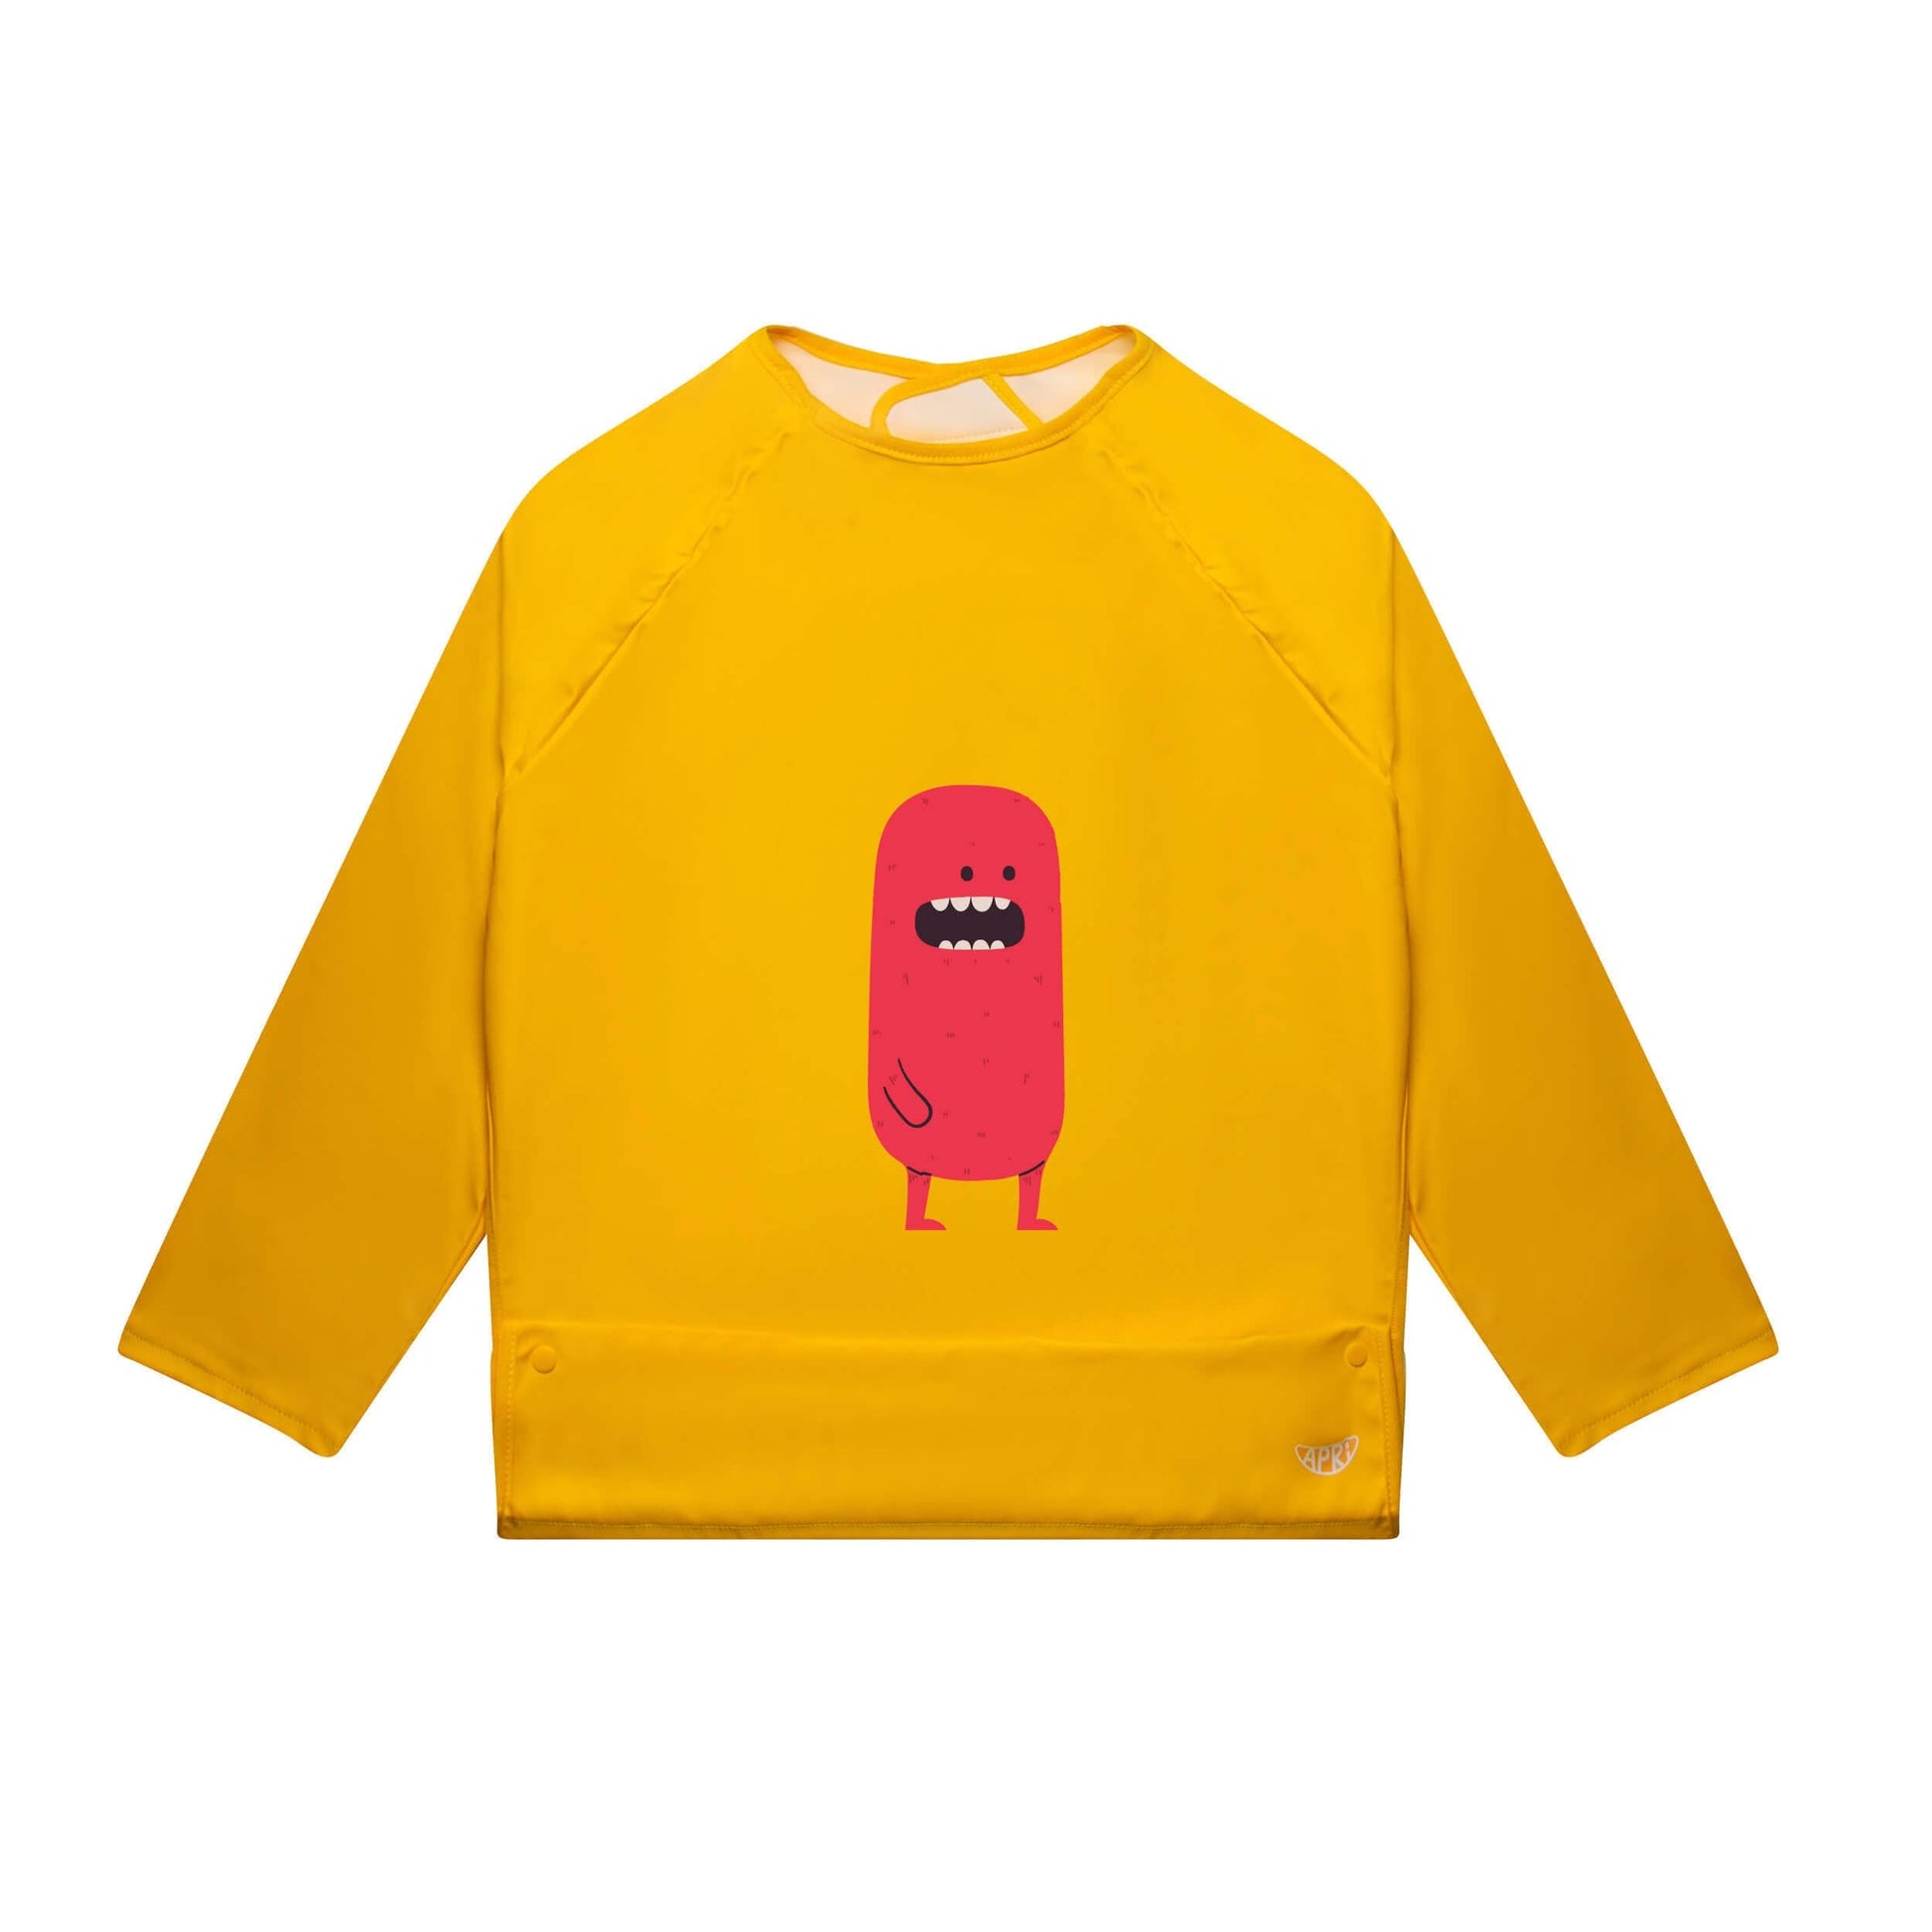 Apri Washable bib for kids, teens, and adults with disabilities. Sunshine yellow, cute red monster design, long-sleeves, and handy food pocket